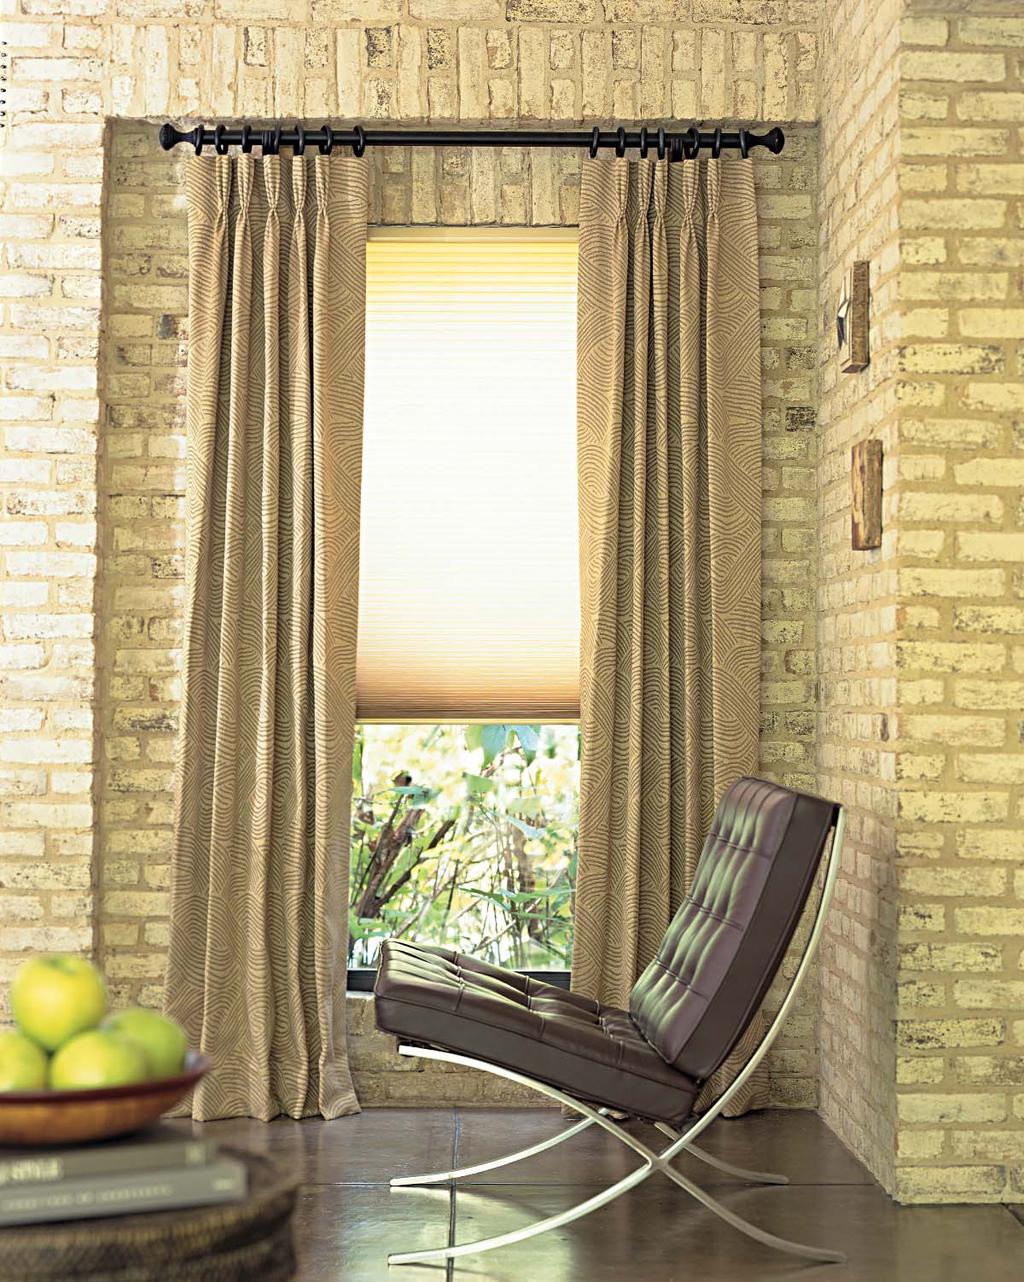 Levolor/Kirsch Window Fashions KIRSCH WOOD TRENDS Product Category: Drapery Hardware This exciting update to the popular Kirsch Wood Trends collection includes 10 new finial designs featuring